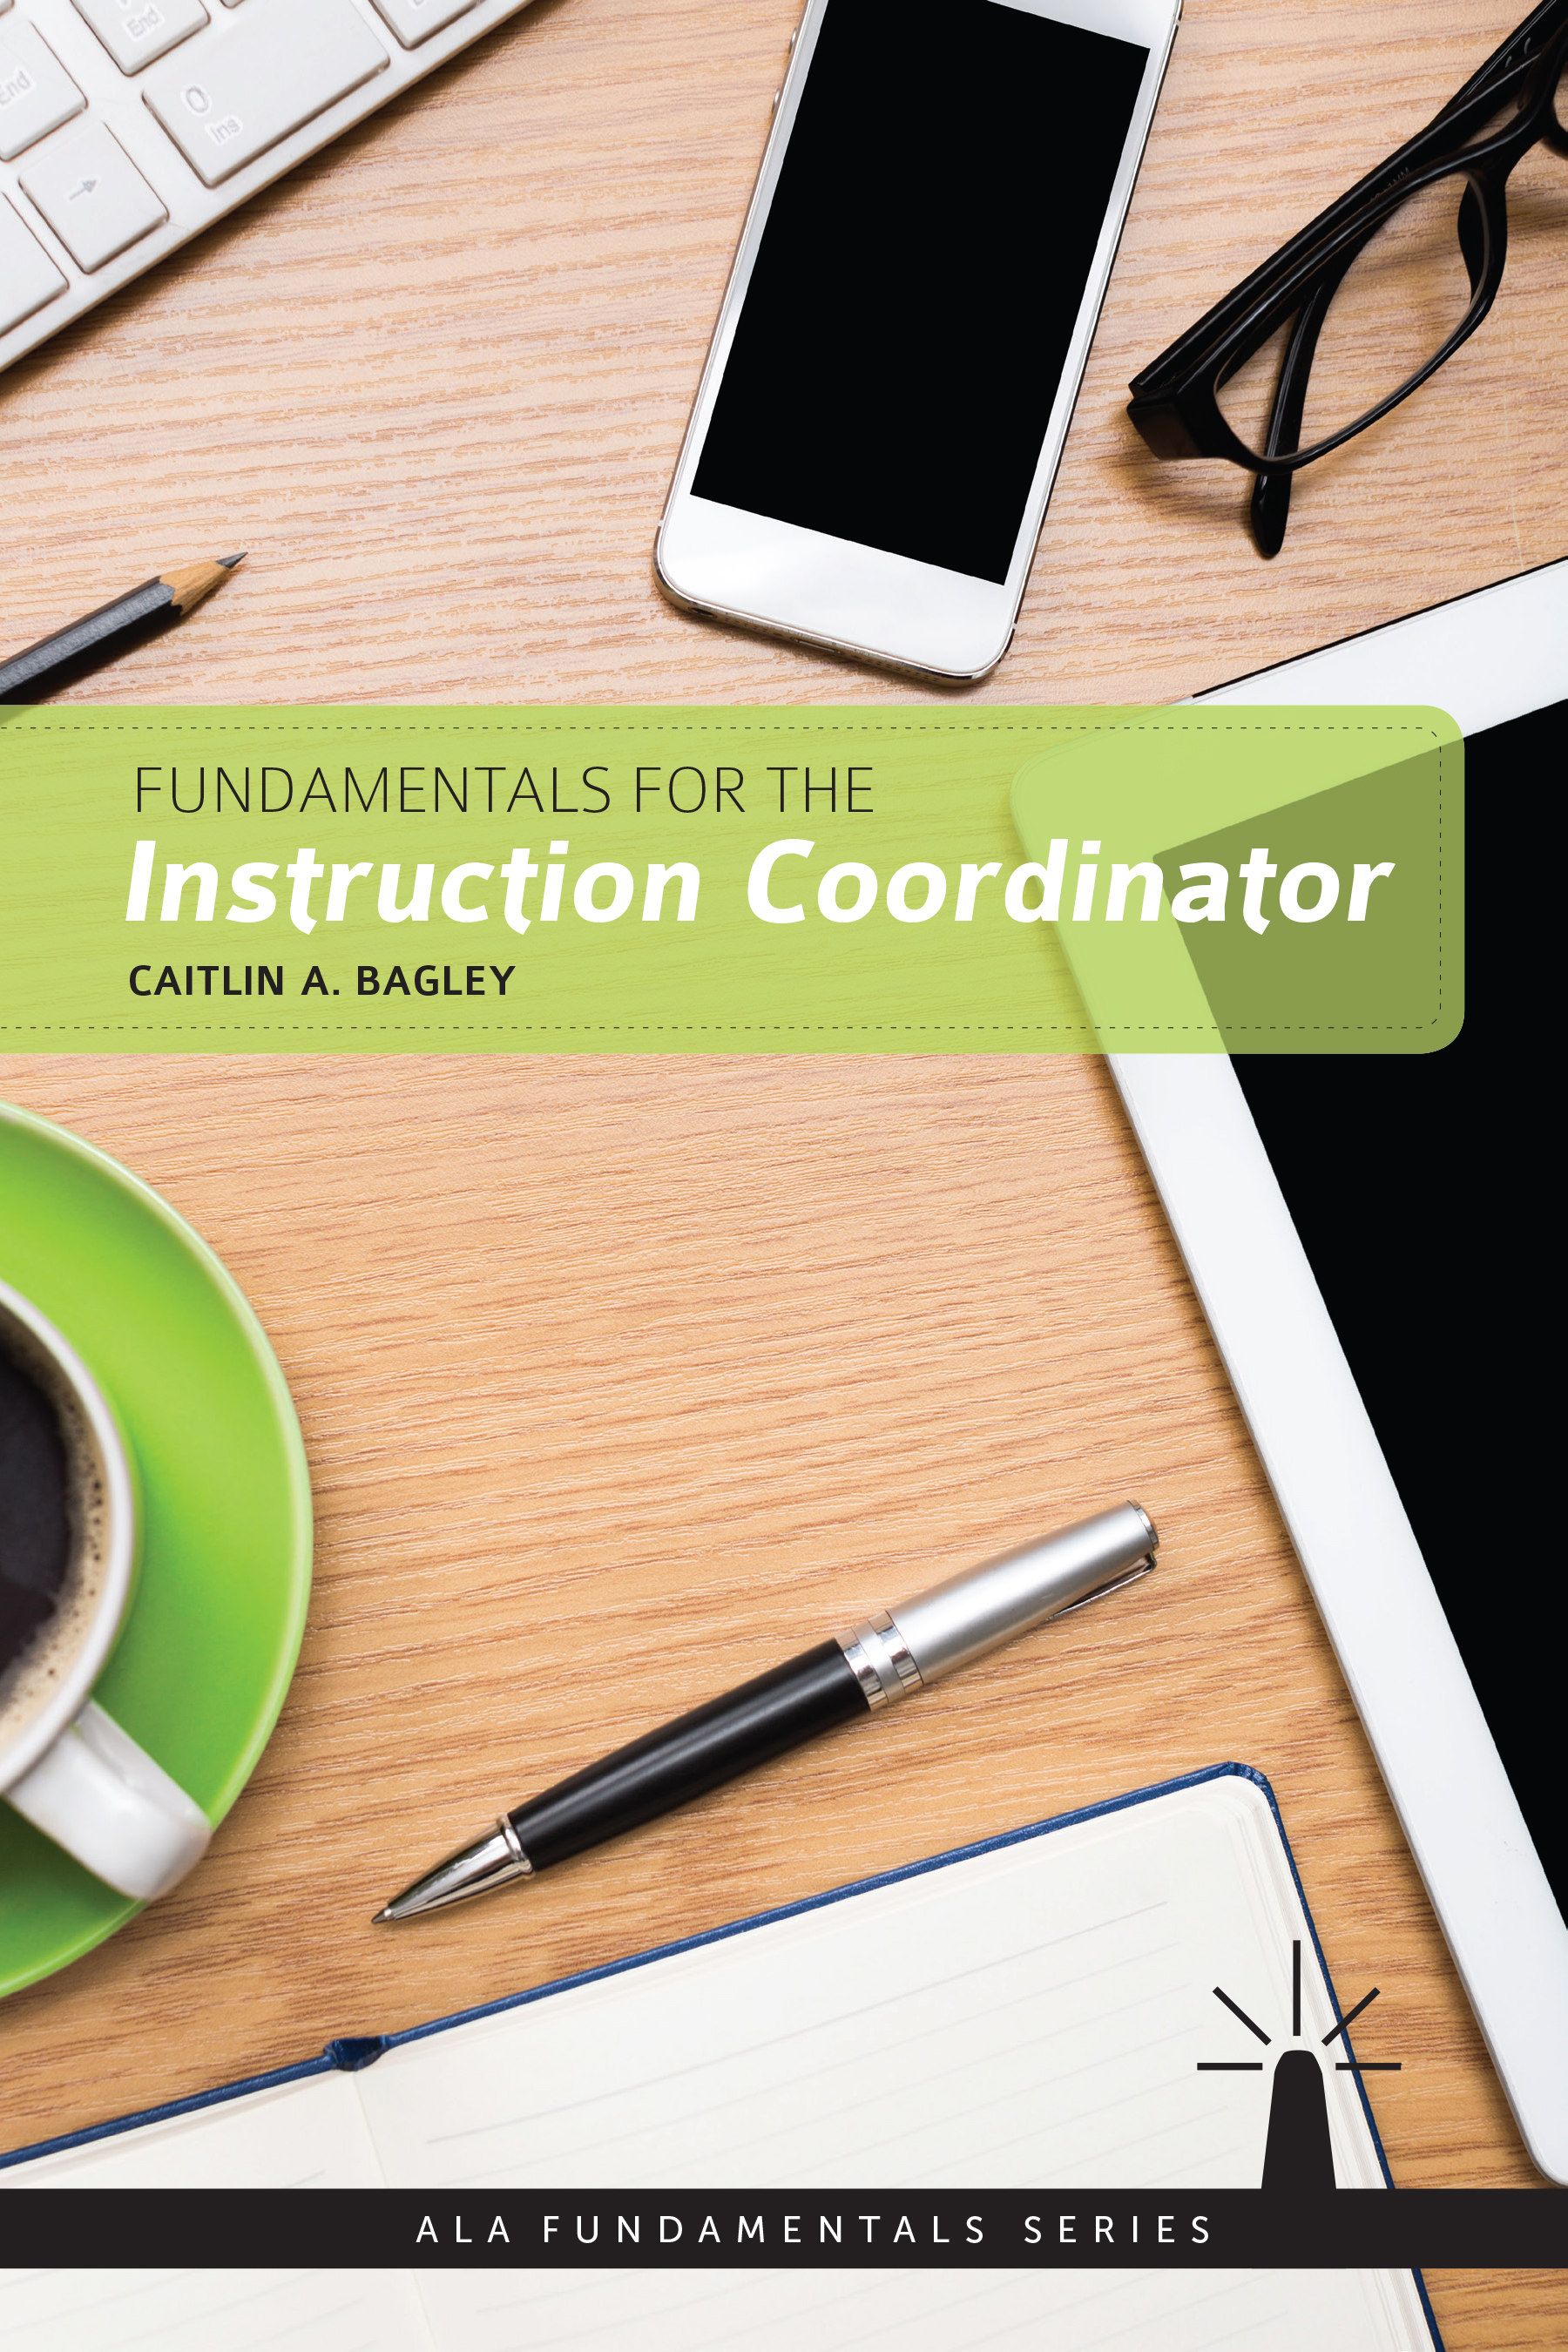 Fundamentals for the Instruction Coordinator